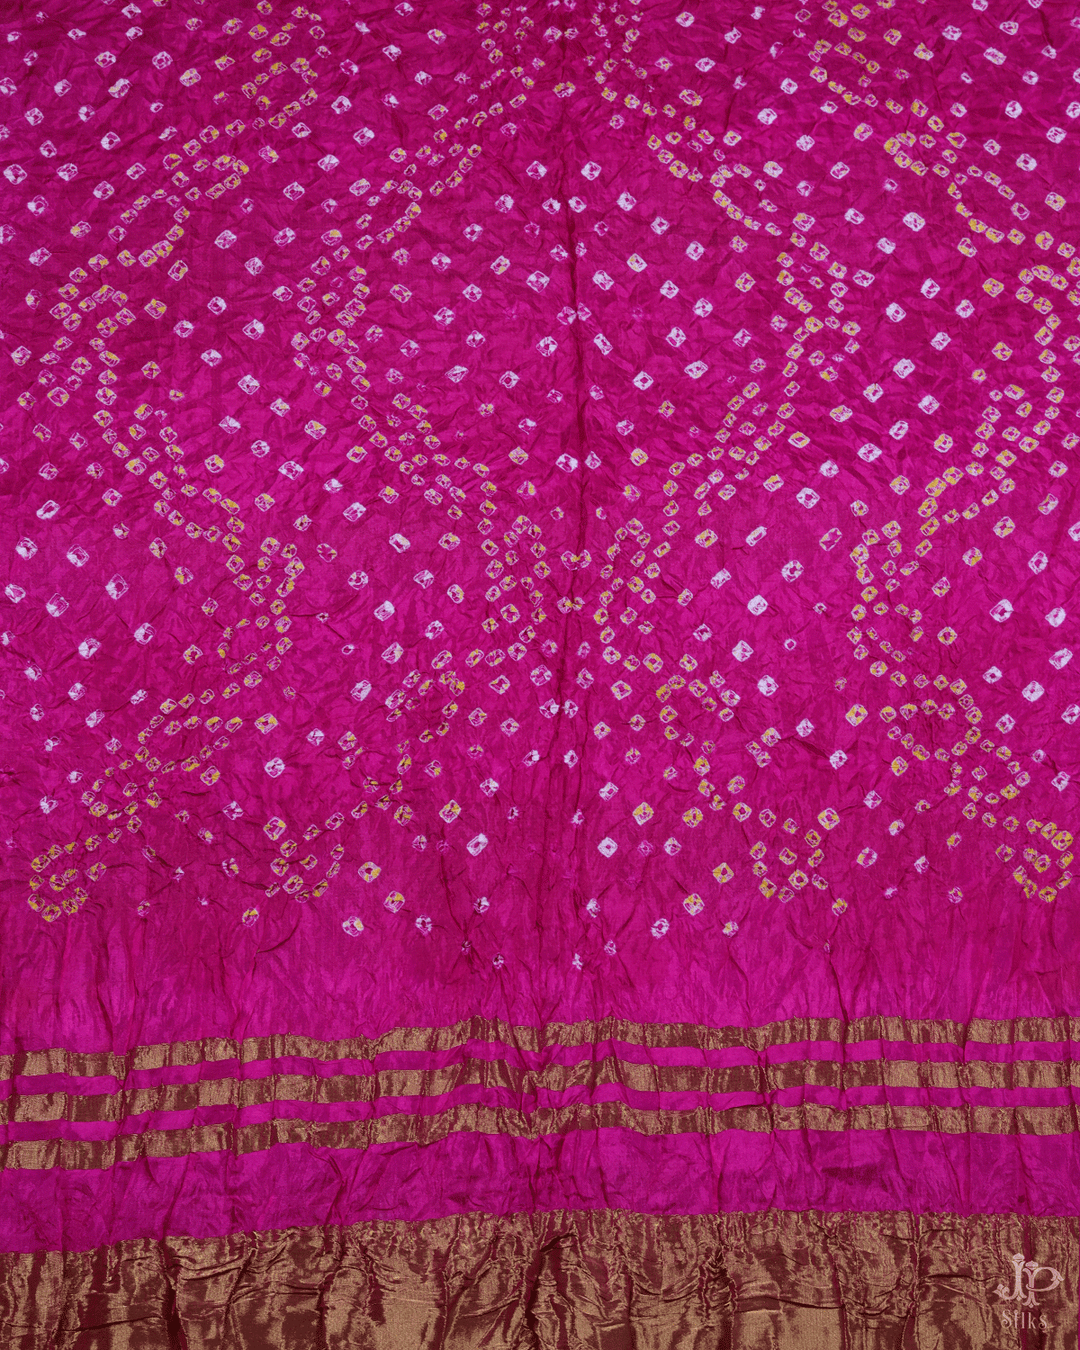 Rani Pink and Off - White Unstitched Chudidhar Material - D7101 - View 5